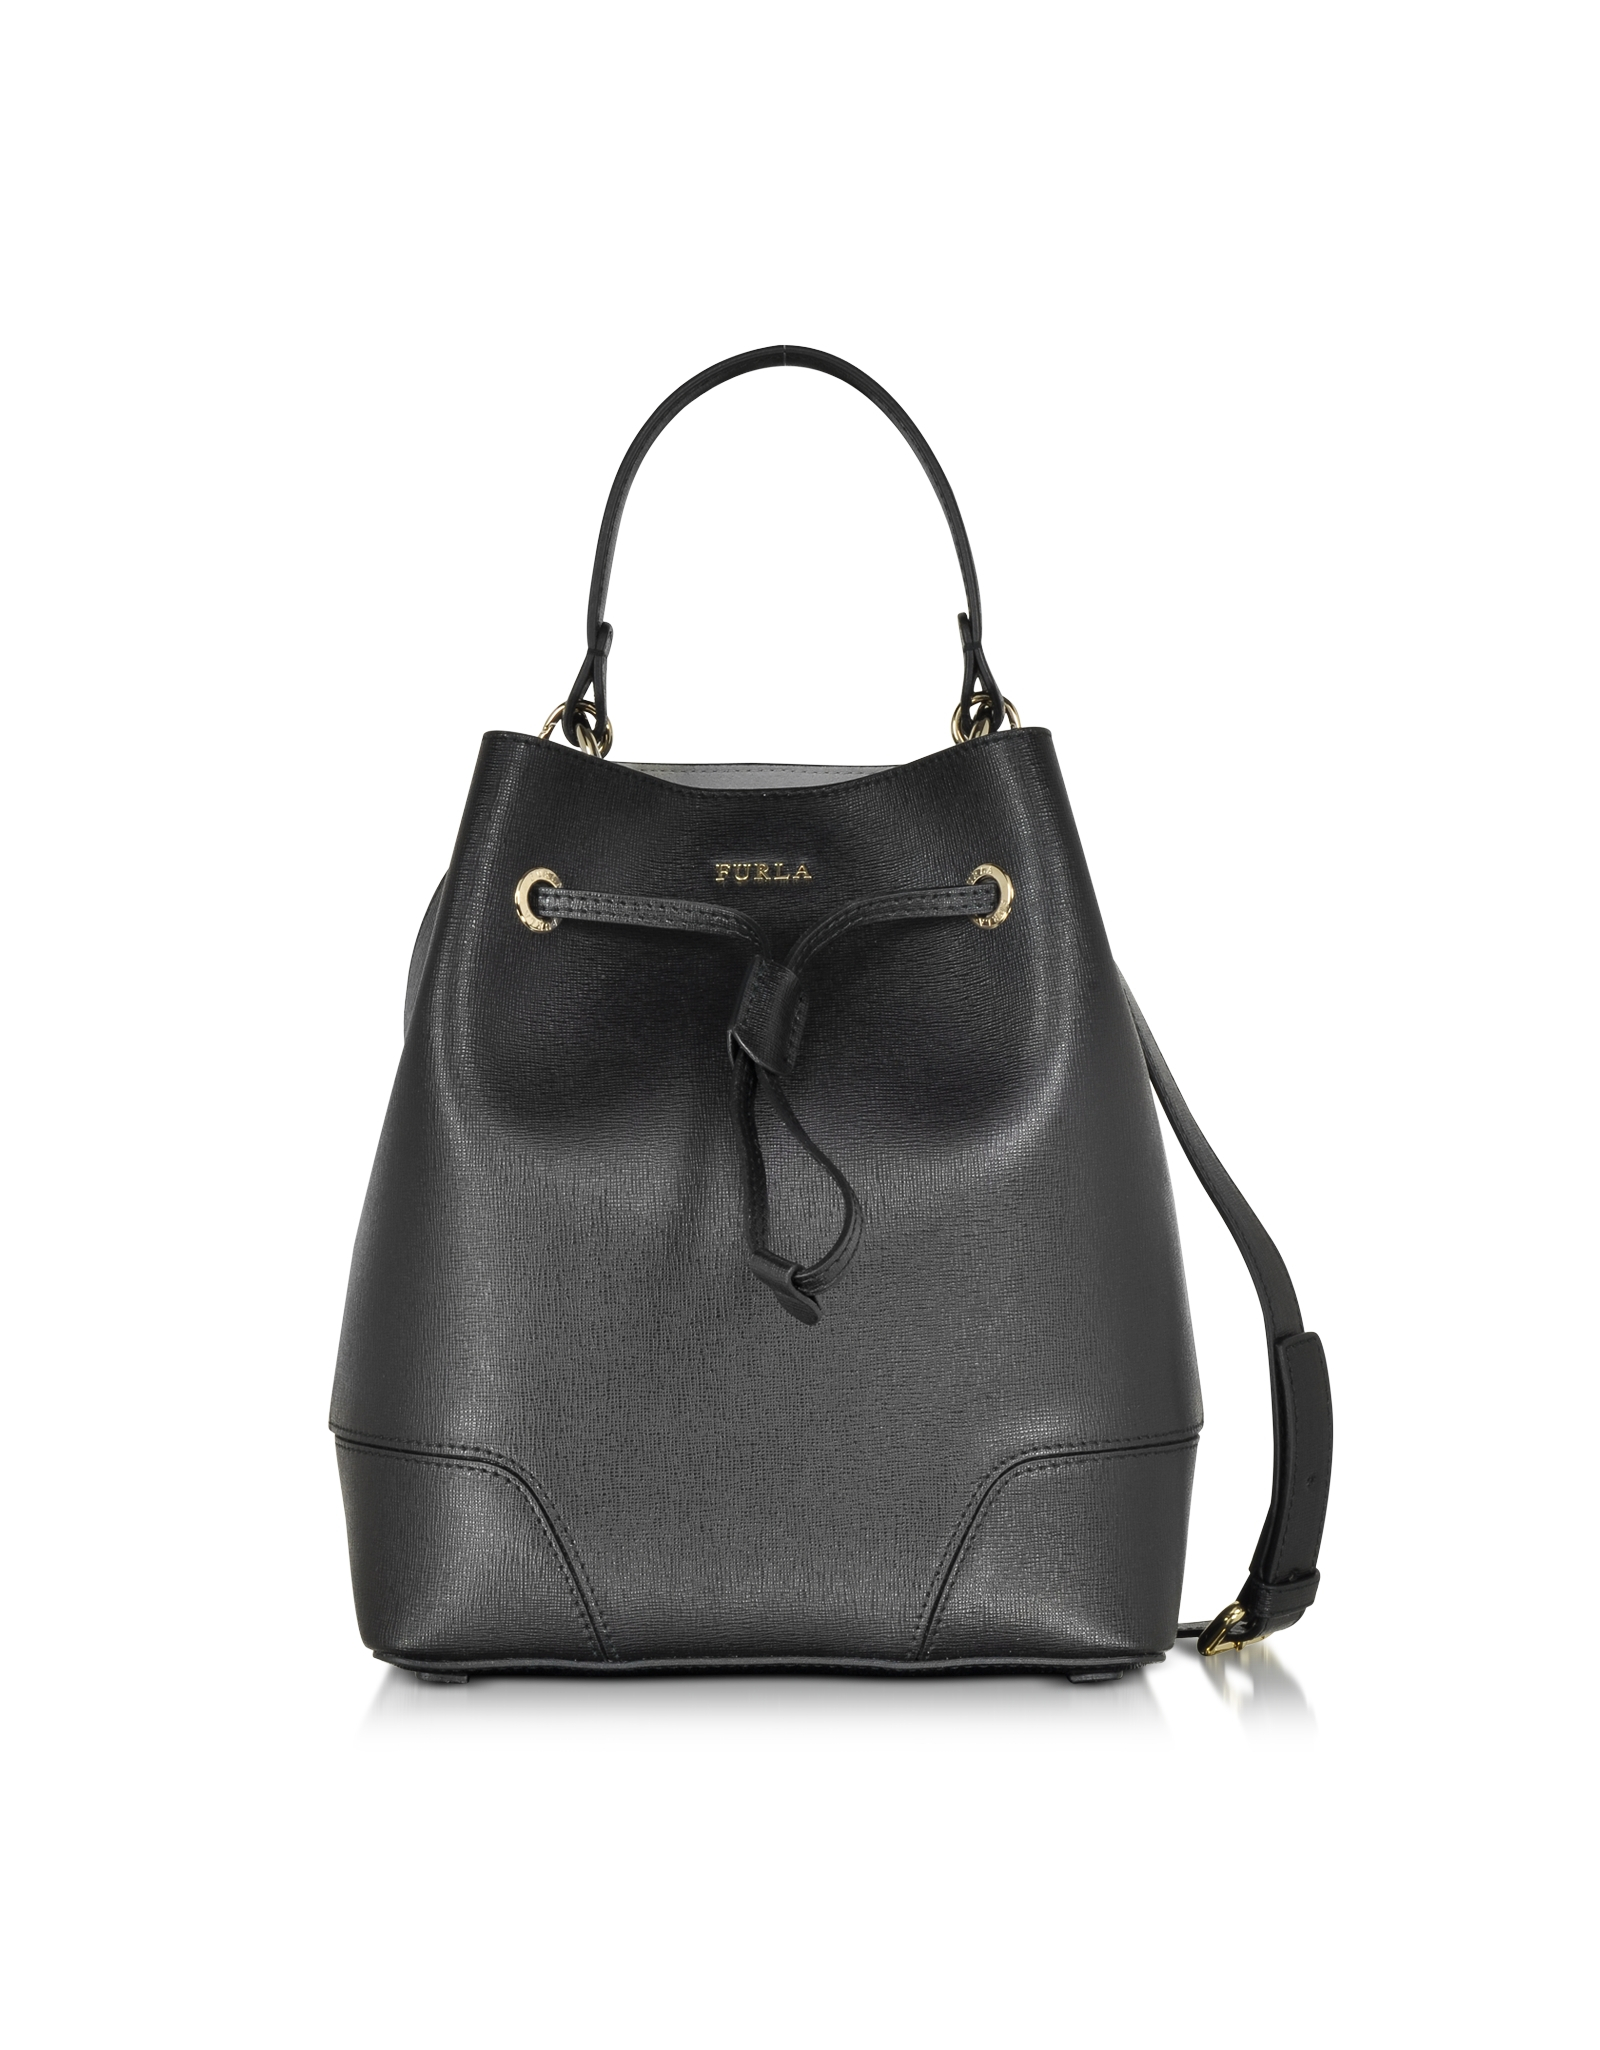 Lyst - Furla Stacy Onyx Leather Small Bucket Bag in Black